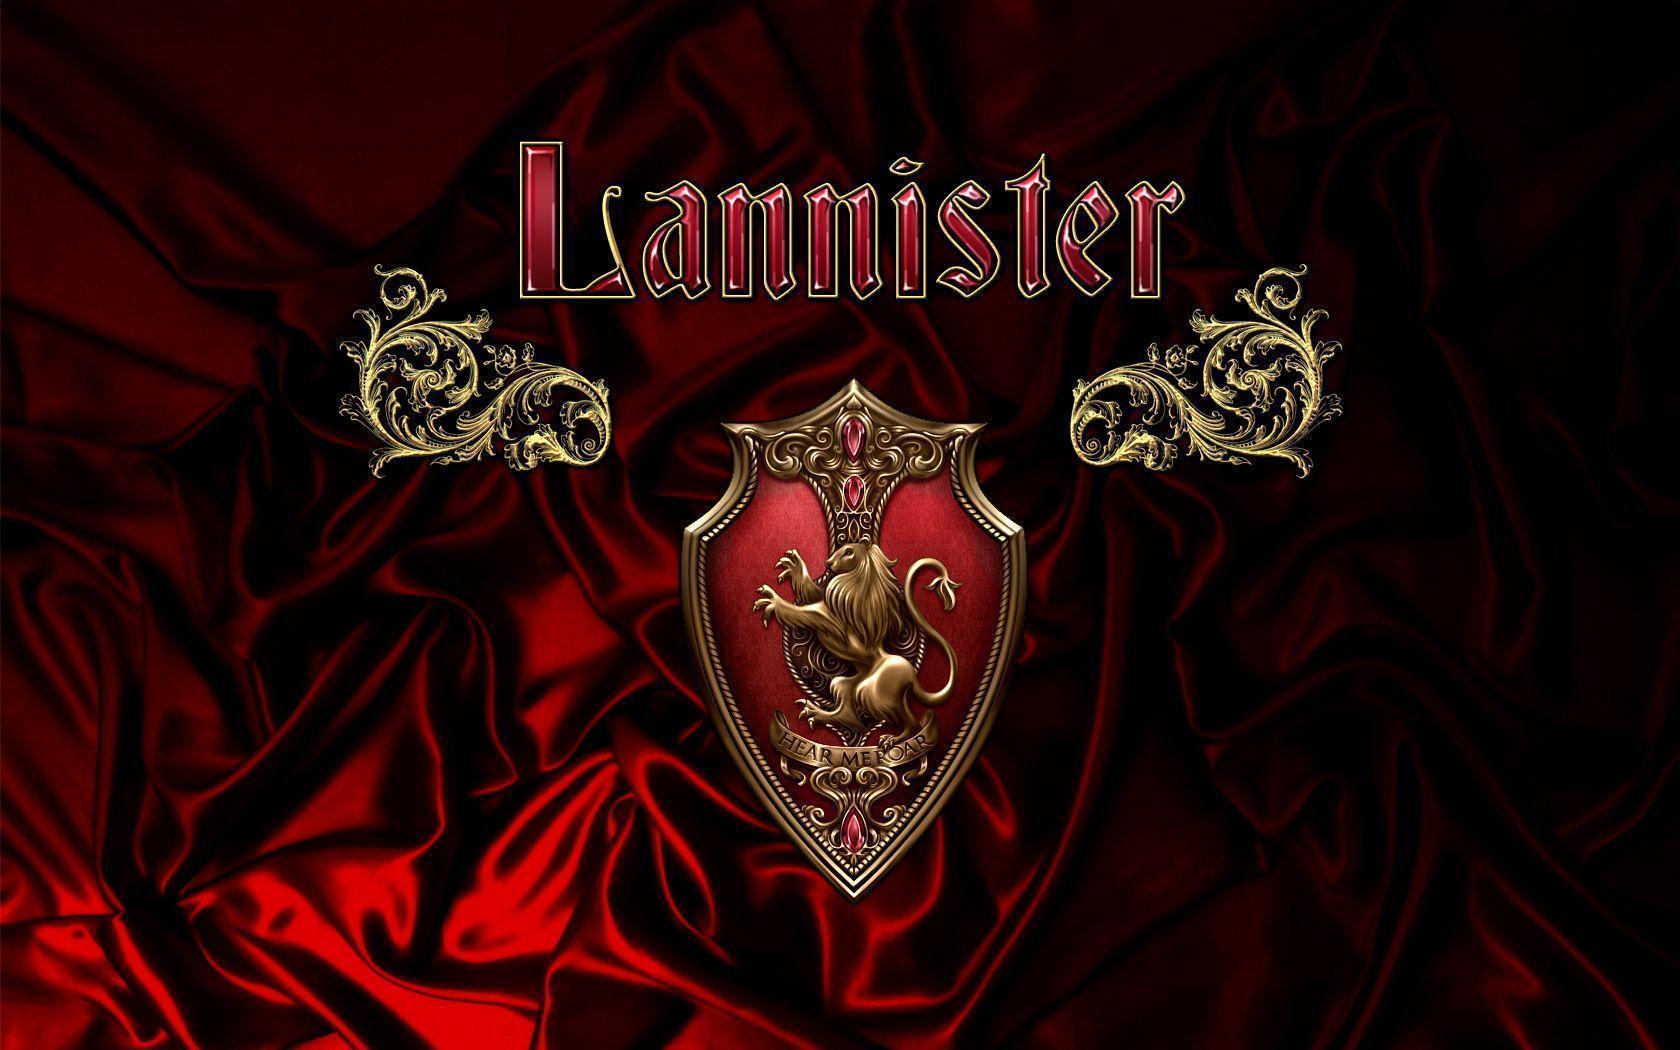 This is a good Lannister wallpaper